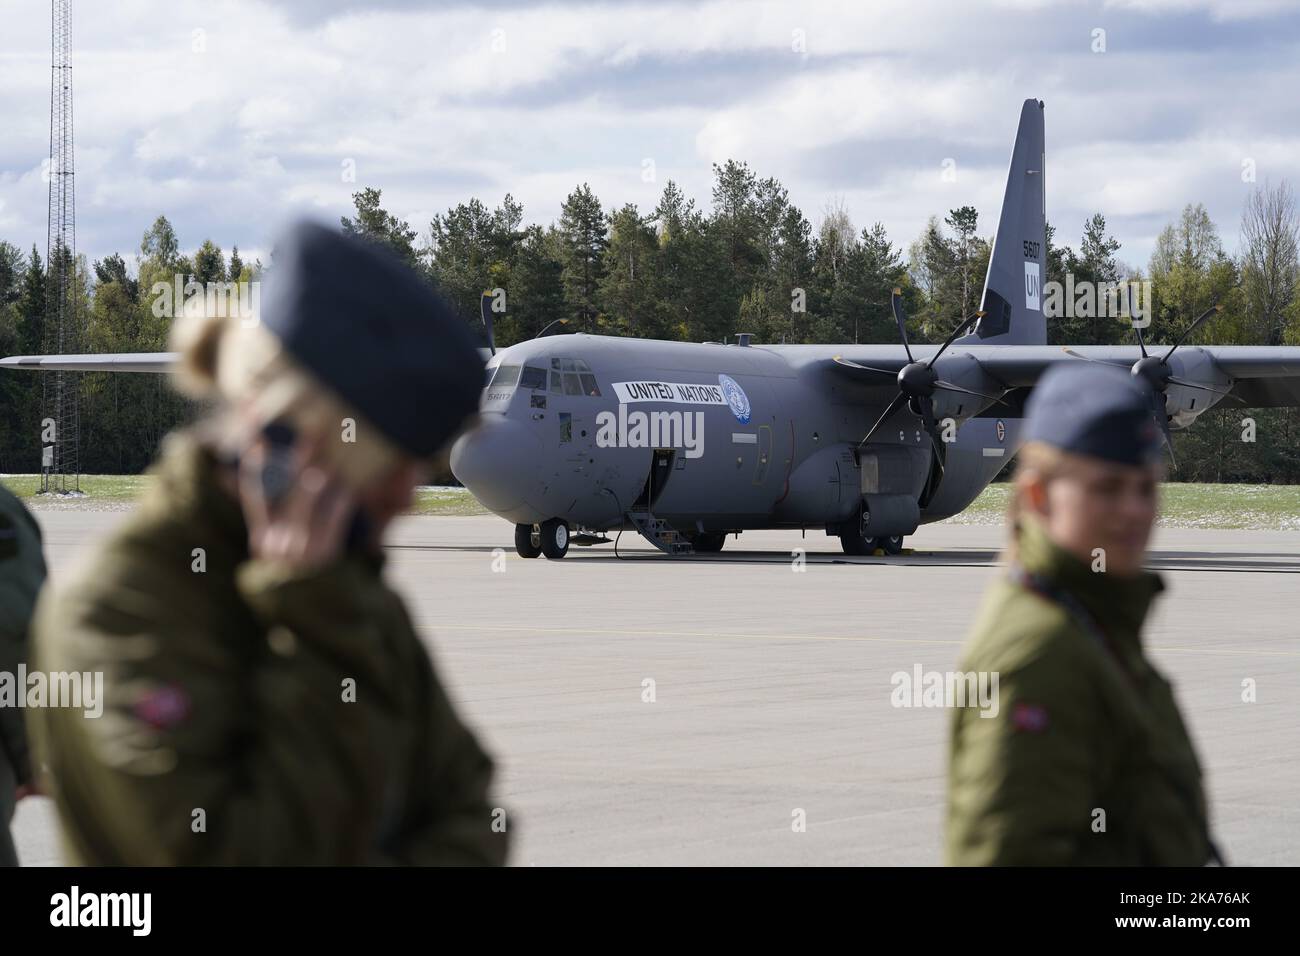 Gardermoen, Norway 20190507. On Tuesday, the Armed Forces sends a Hercules transport aircraft with 6o Norwegian soldiers from Gardermoen to Mali for participation in the UN peacekeeping force MINUSMA. The soldiers will seek to create stability in a country destroyed by separatists and terrorist groups. Photo: Heiko Junge / NTB scanpix Stock Photo